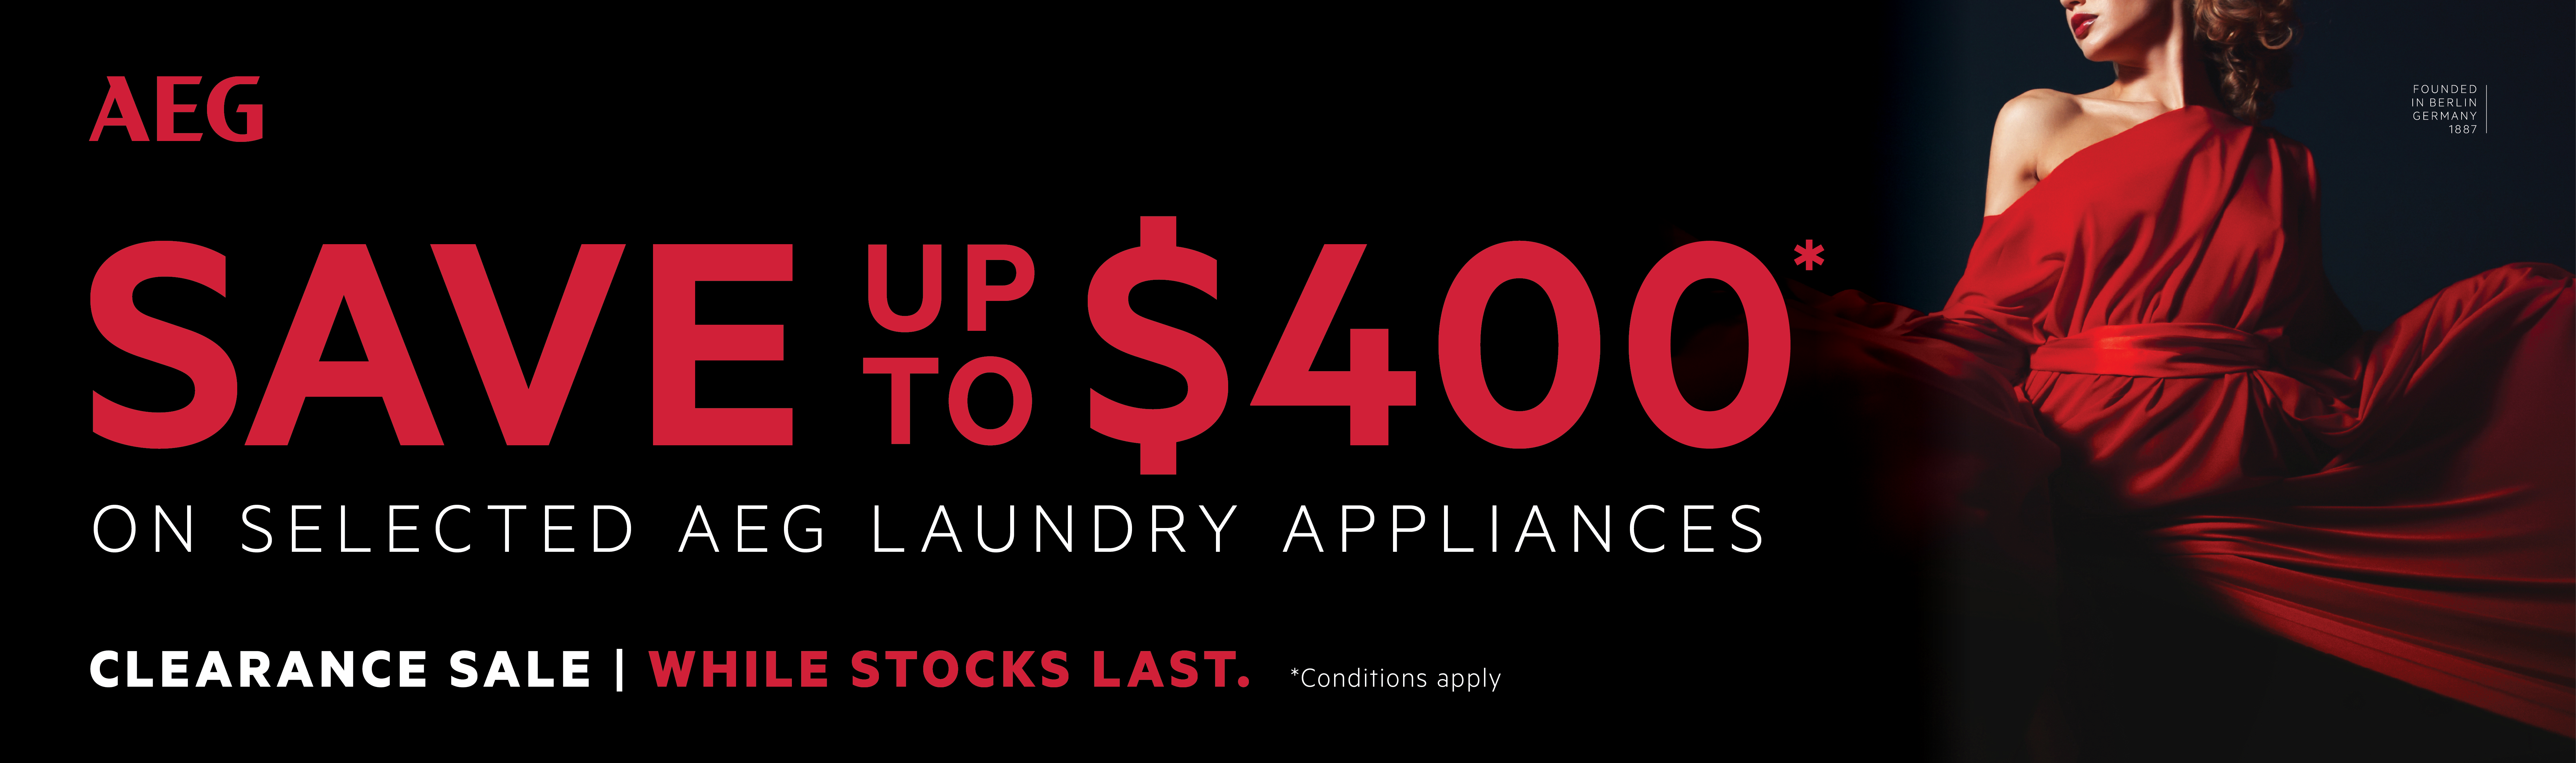 Save up to $400* on Selected AEG Laundry Appliances